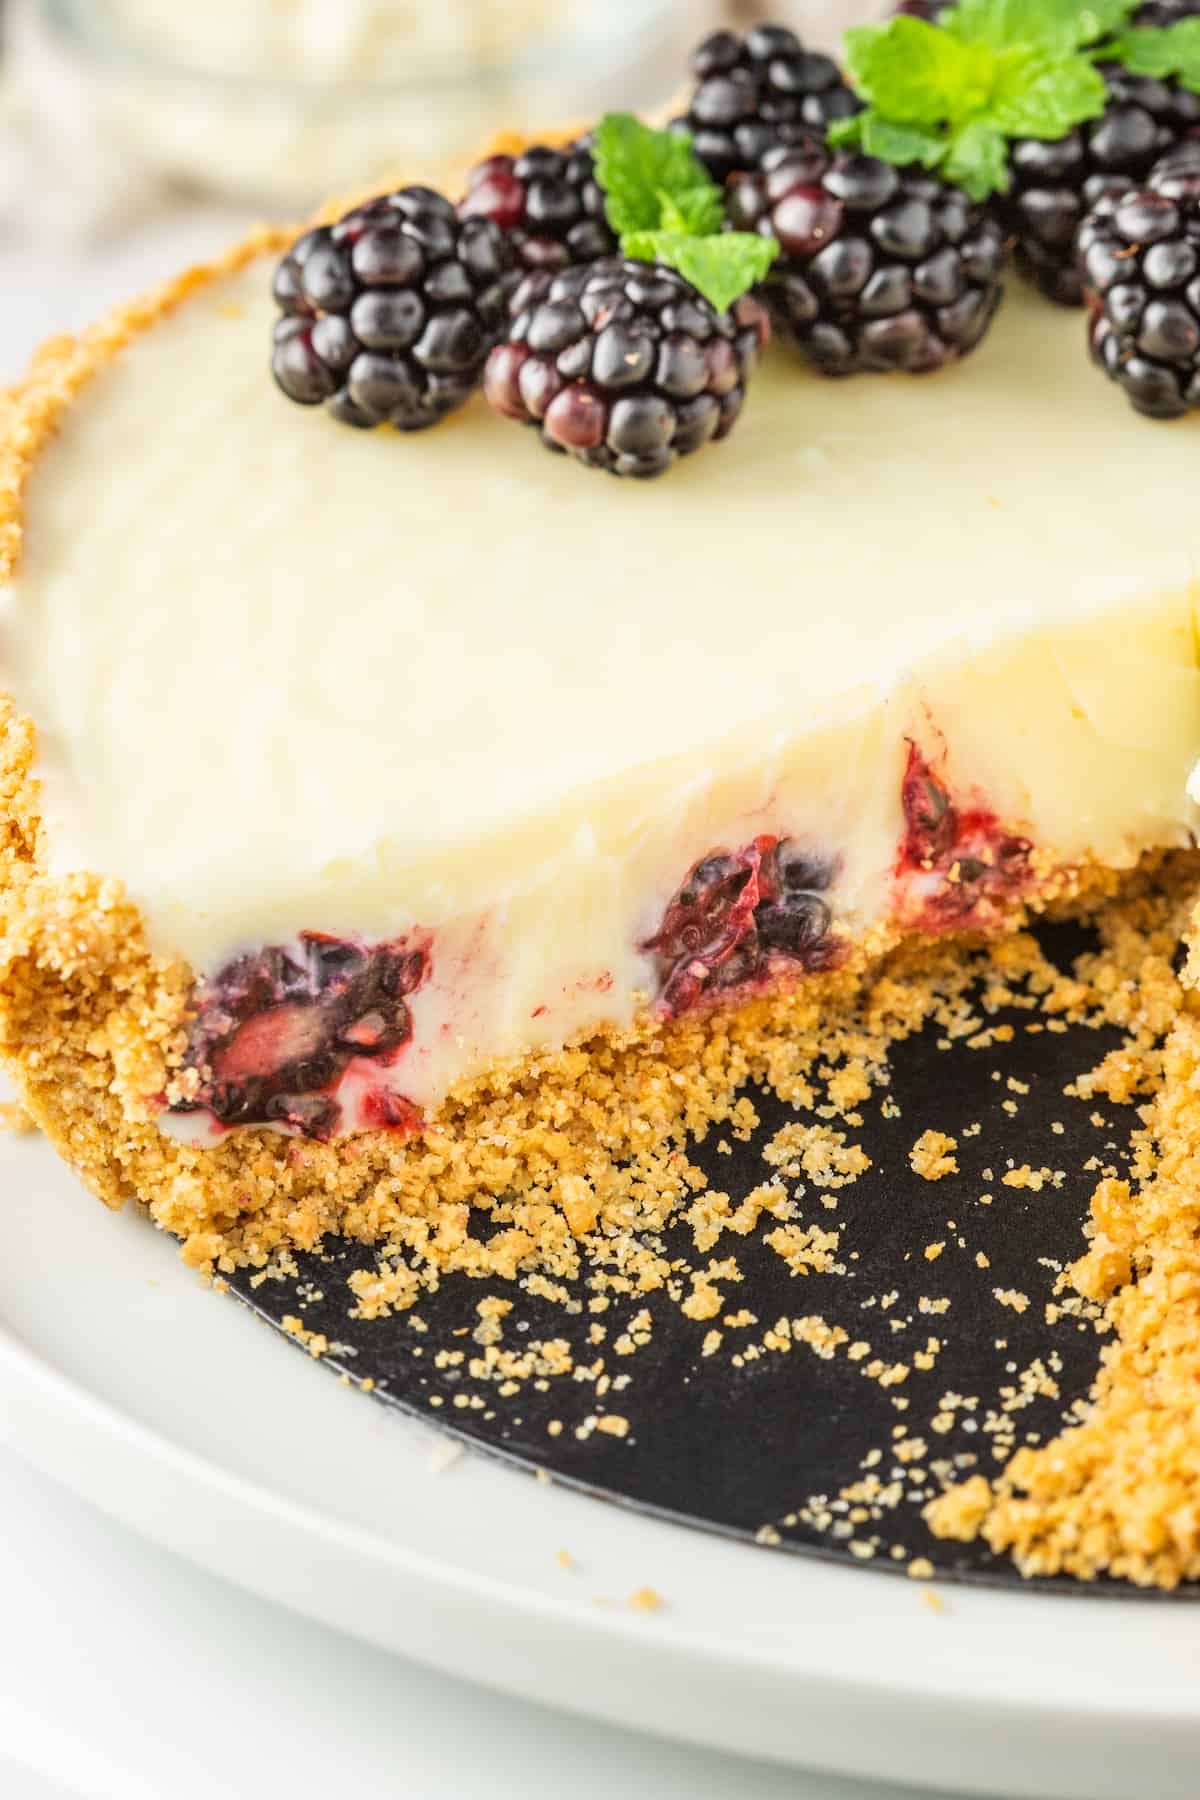 A white chocolate blackberry tart on a plate with a slice taken out.